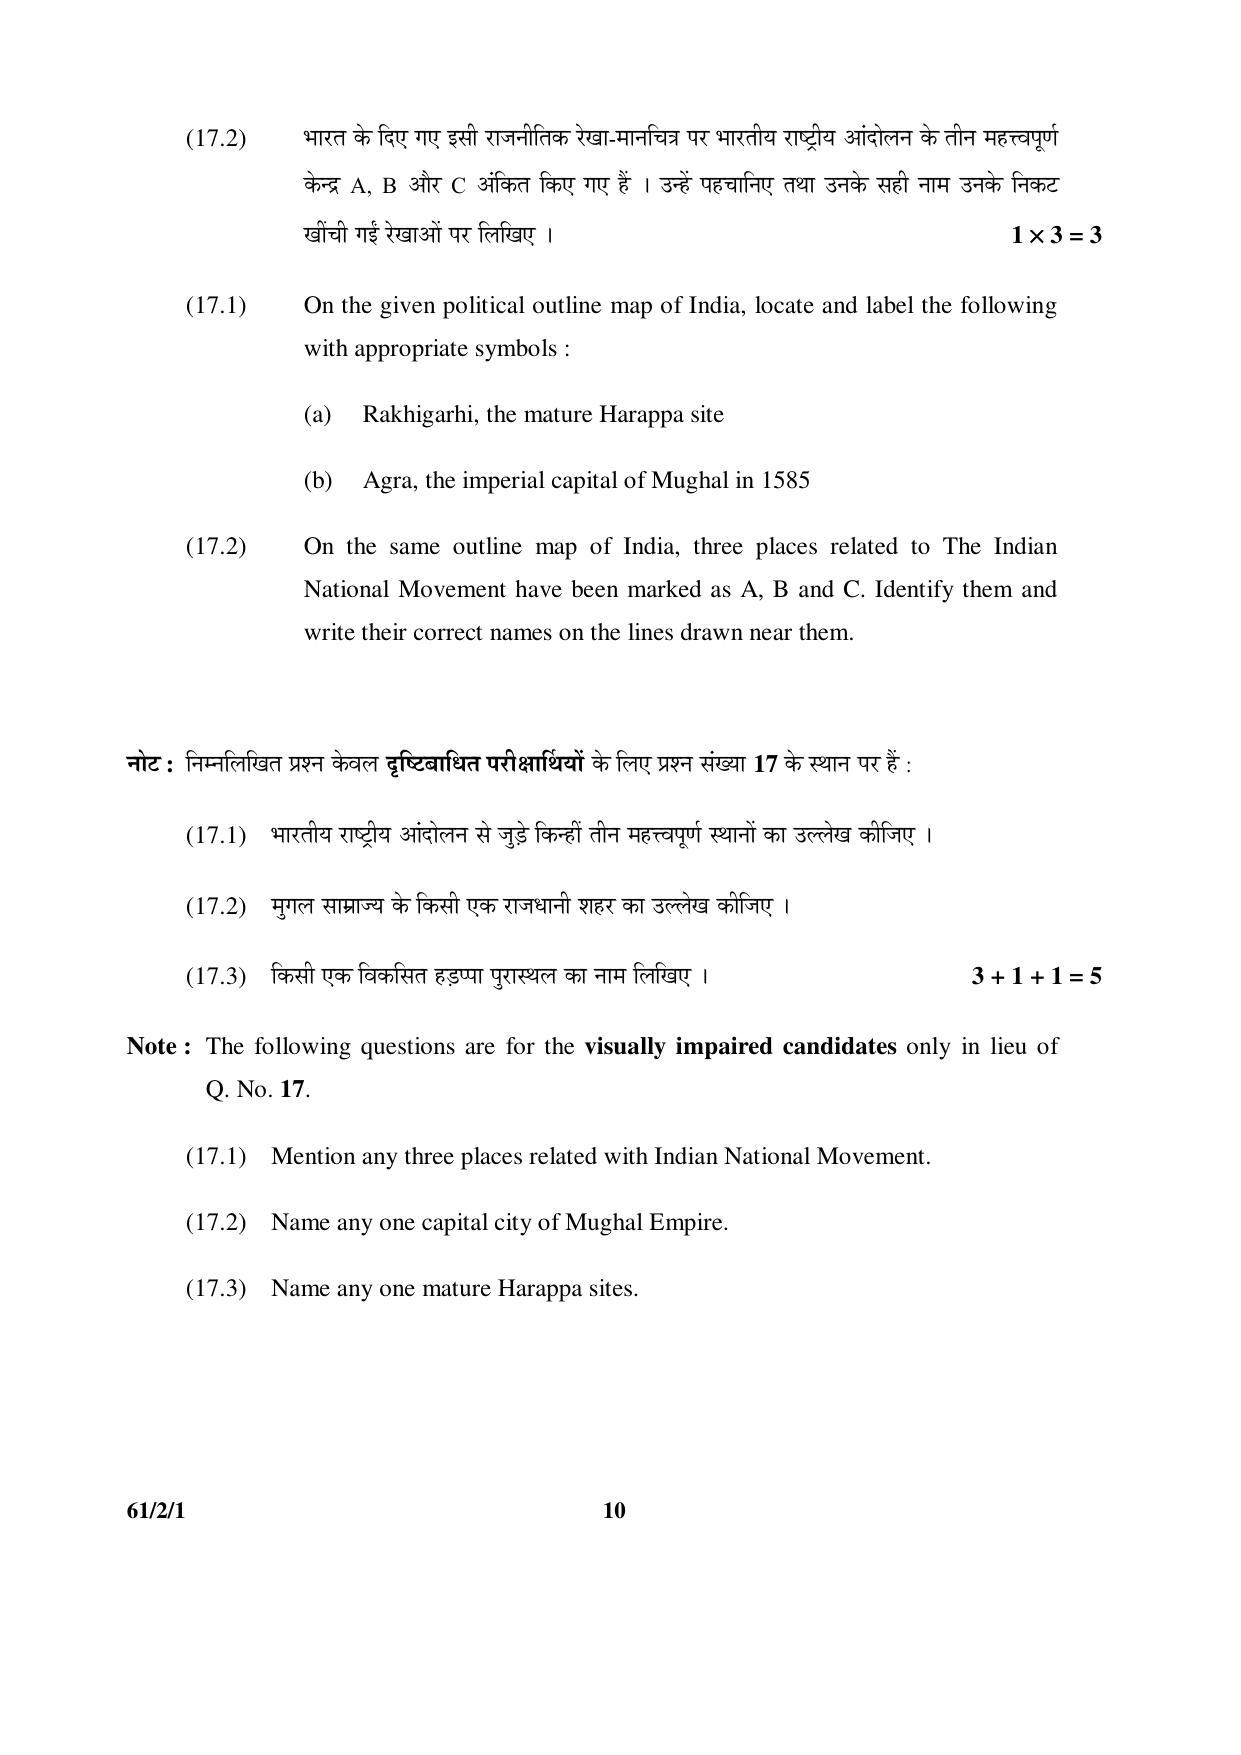 CBSE Class 12 61-2-1 History 2016 Question Paper - Page 10